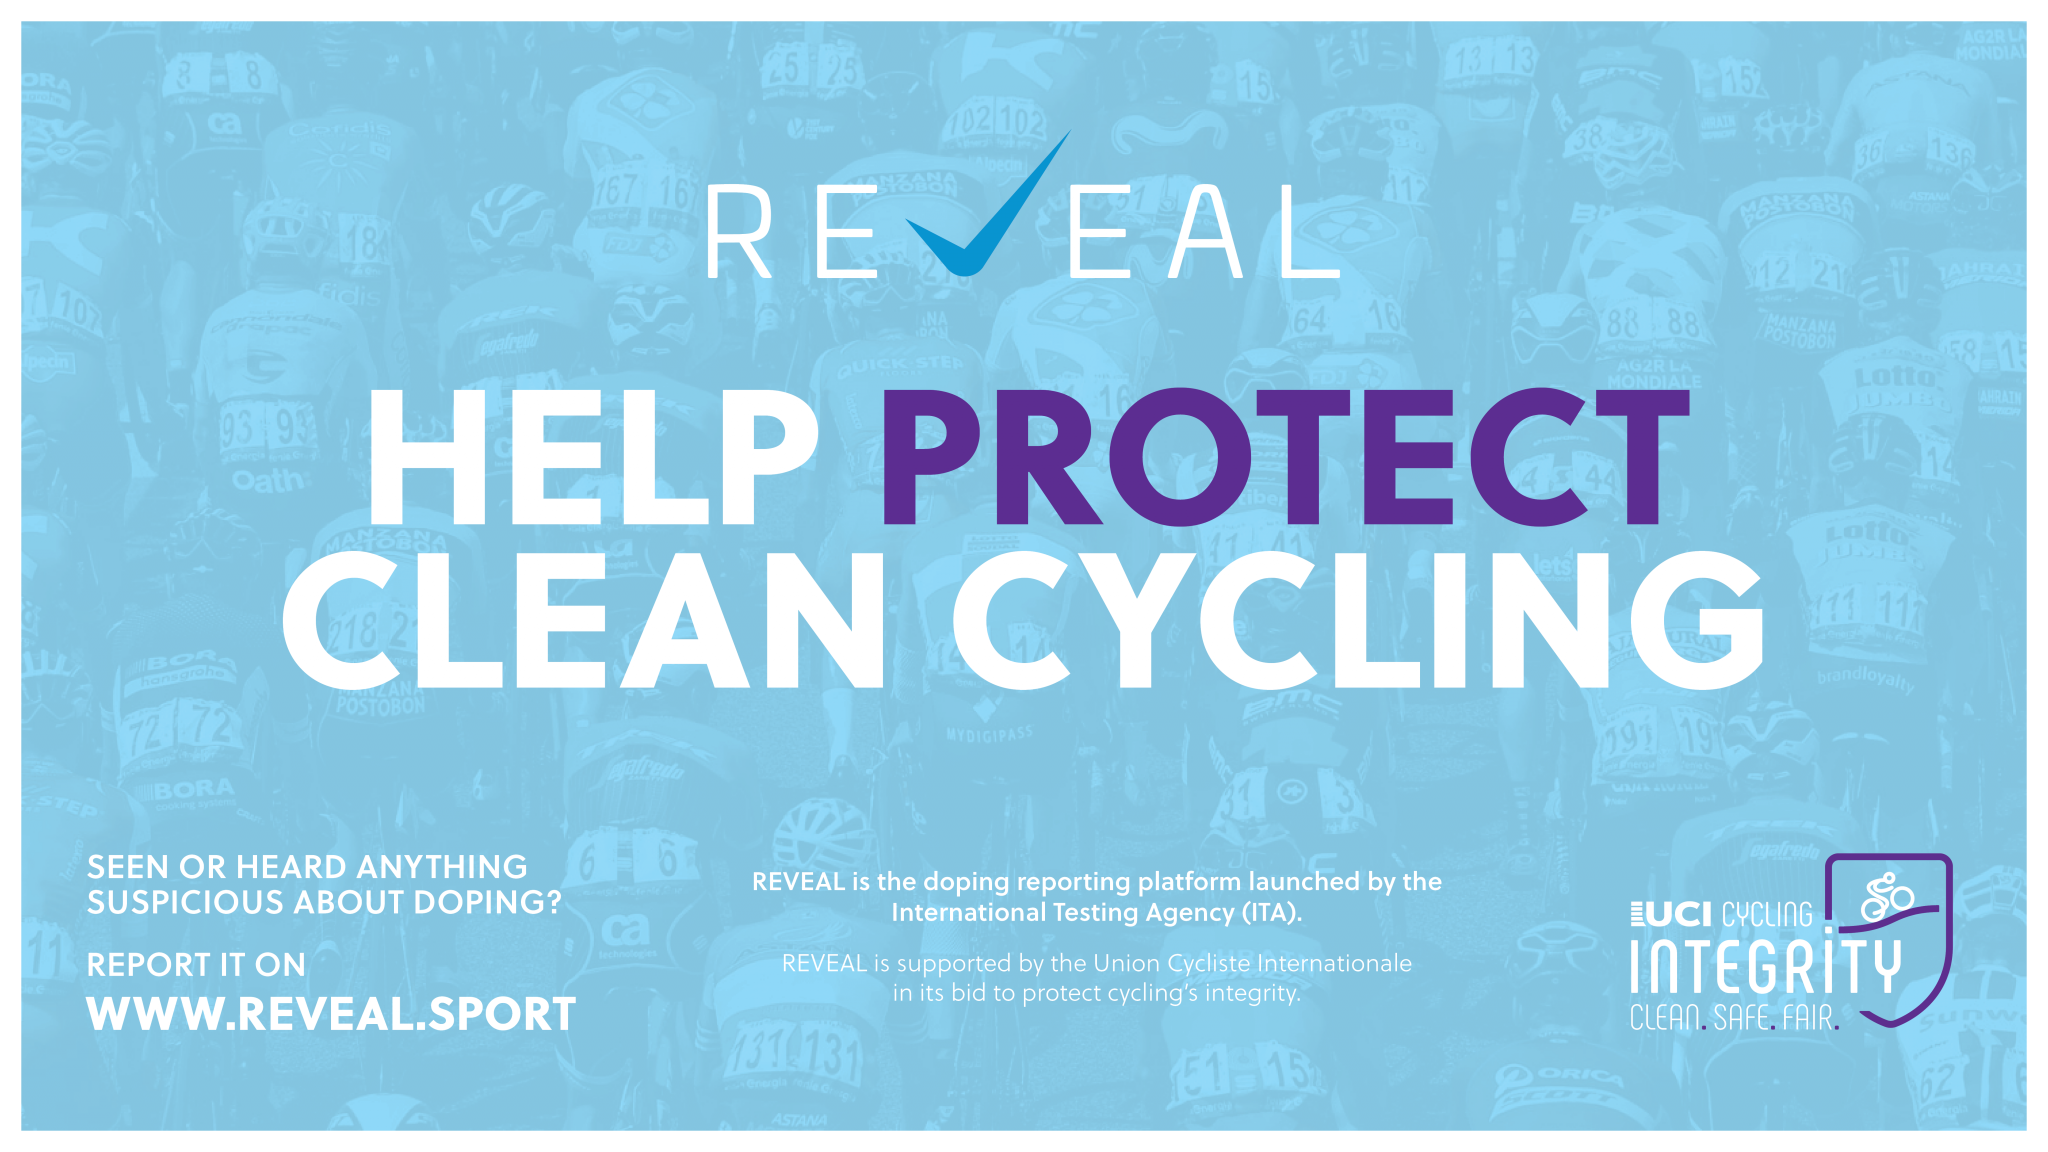 The REVEAL programme is being promoted as part of the Cycling Integrity launch ©UCI